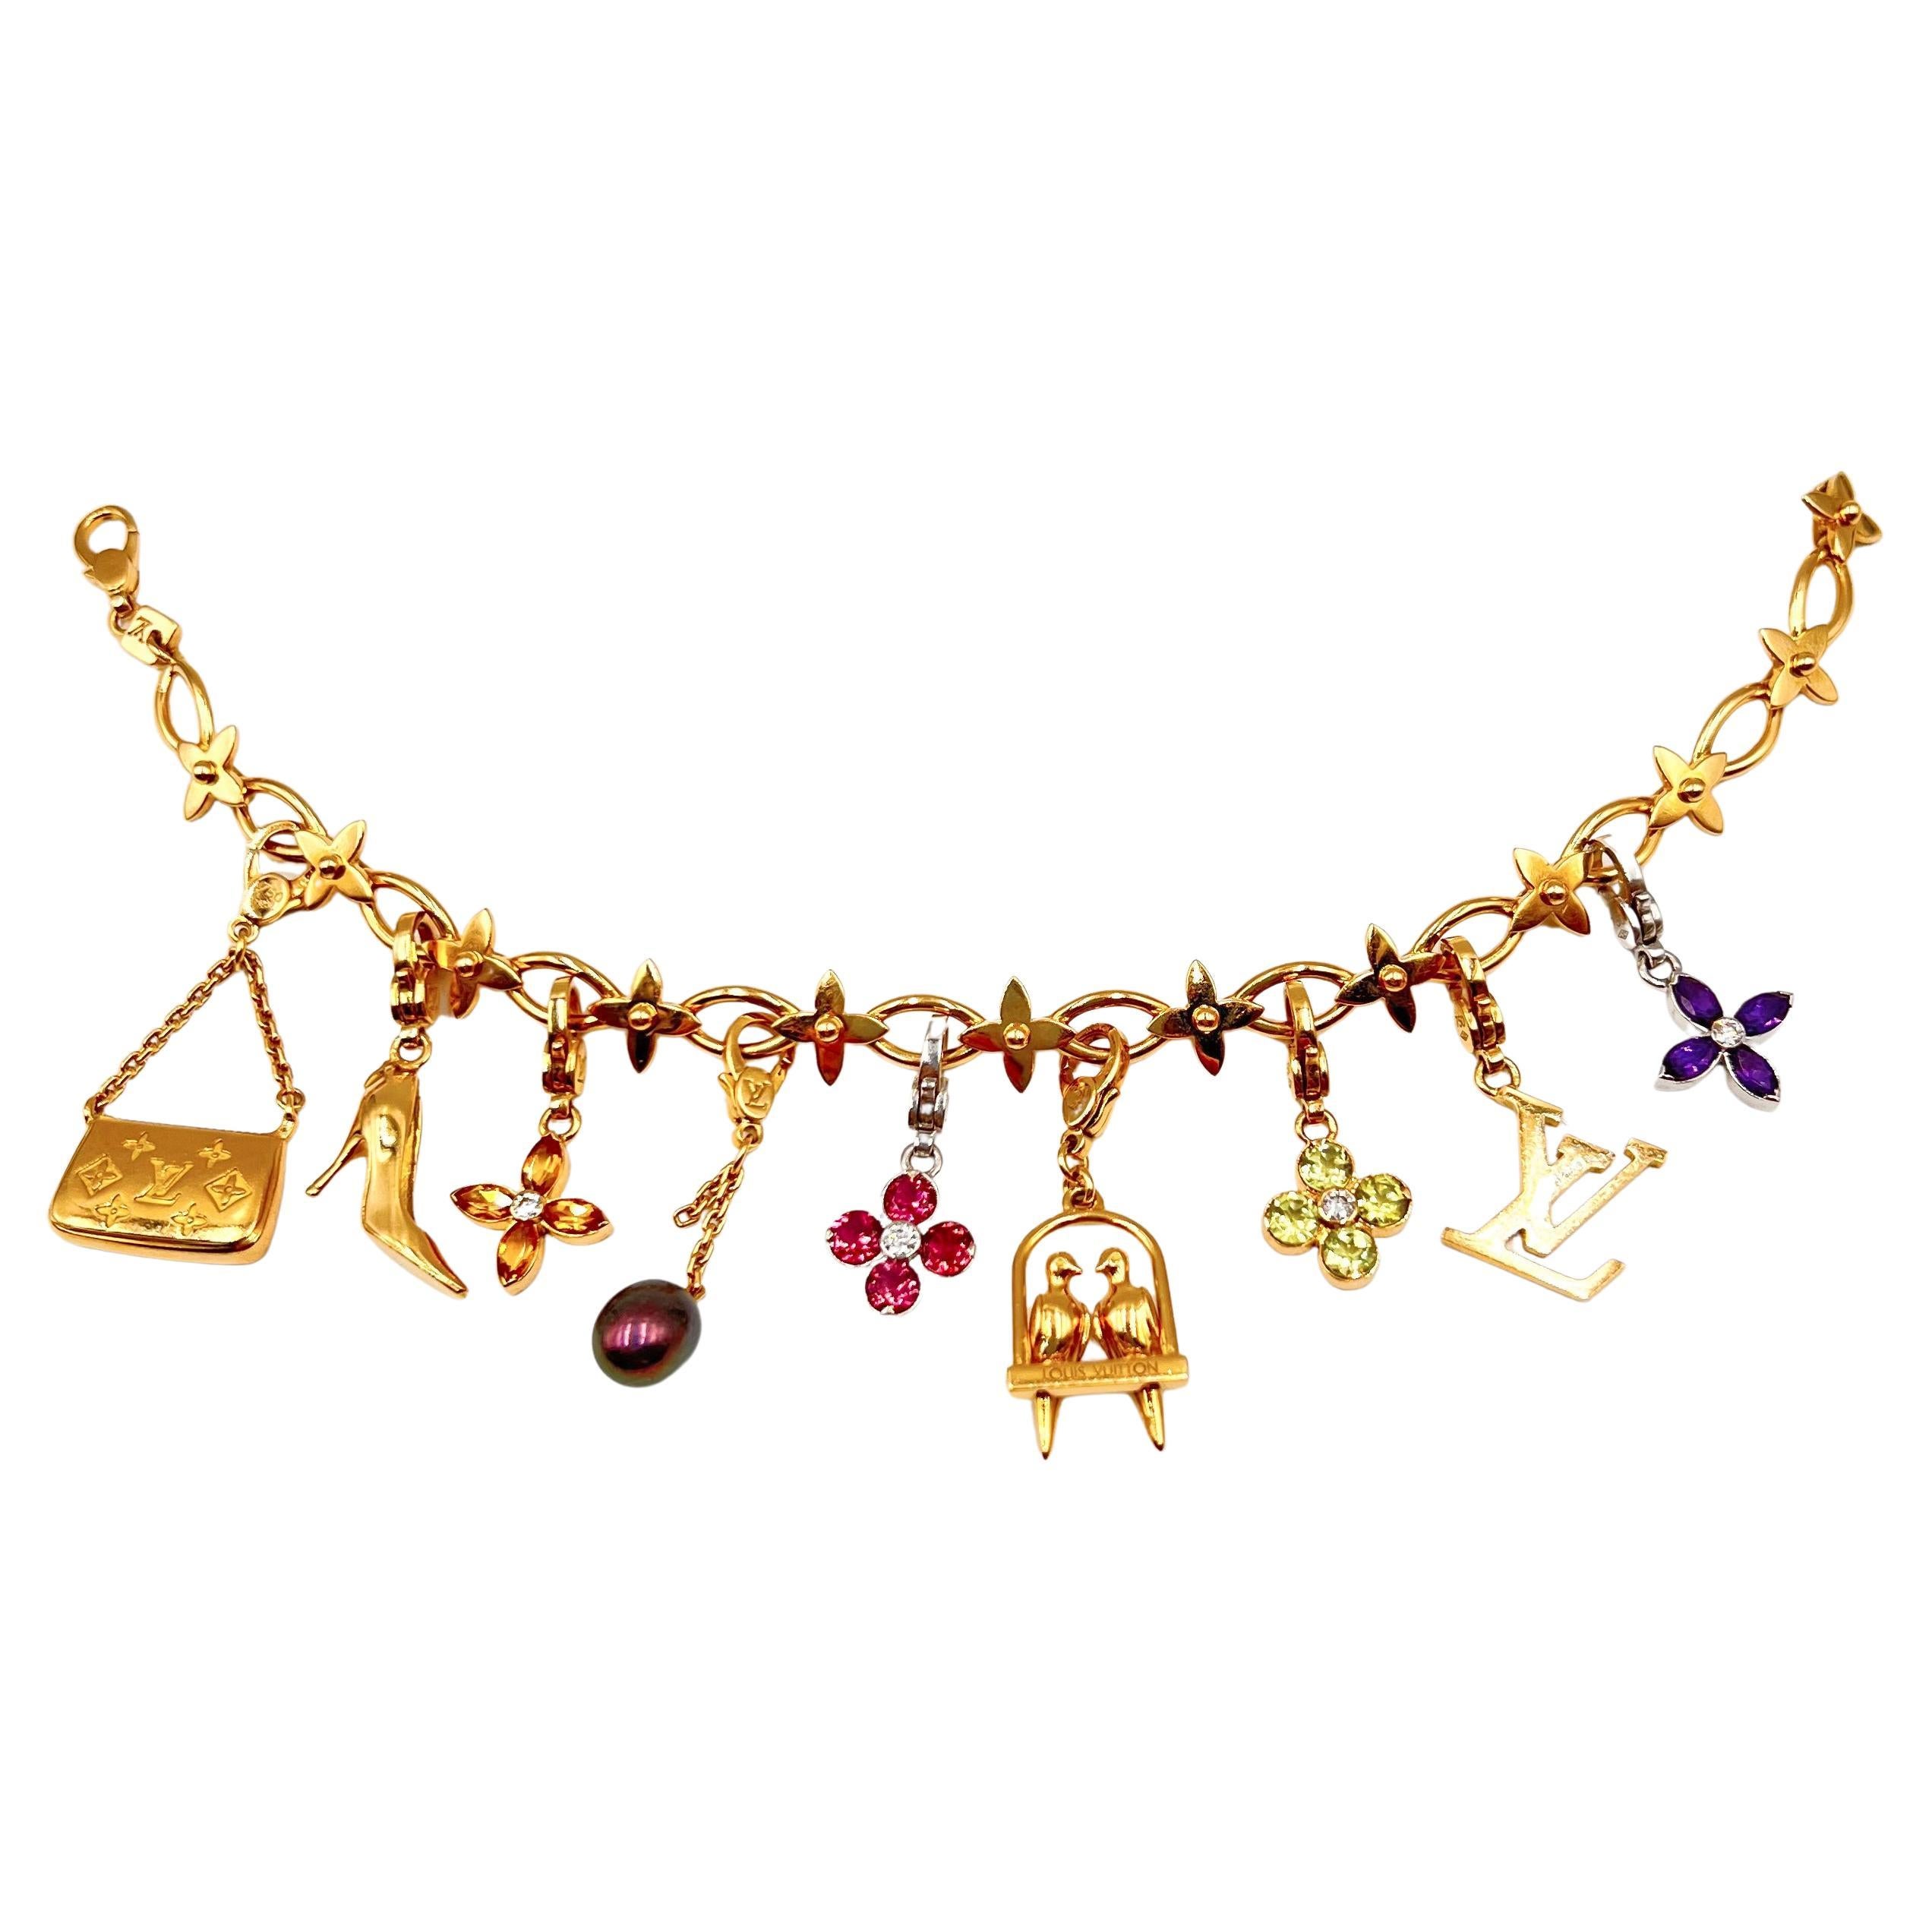 Louis Vuitton bracelet in 18kt yellow gold with nine Louis Vuitton detachable charms.  The miniature Louis Vuitton charms include a Louis Vuitton purse; LV high heel shoe; LV citrine diamond flower; LV black cultured pearl on chain; LV 18k white